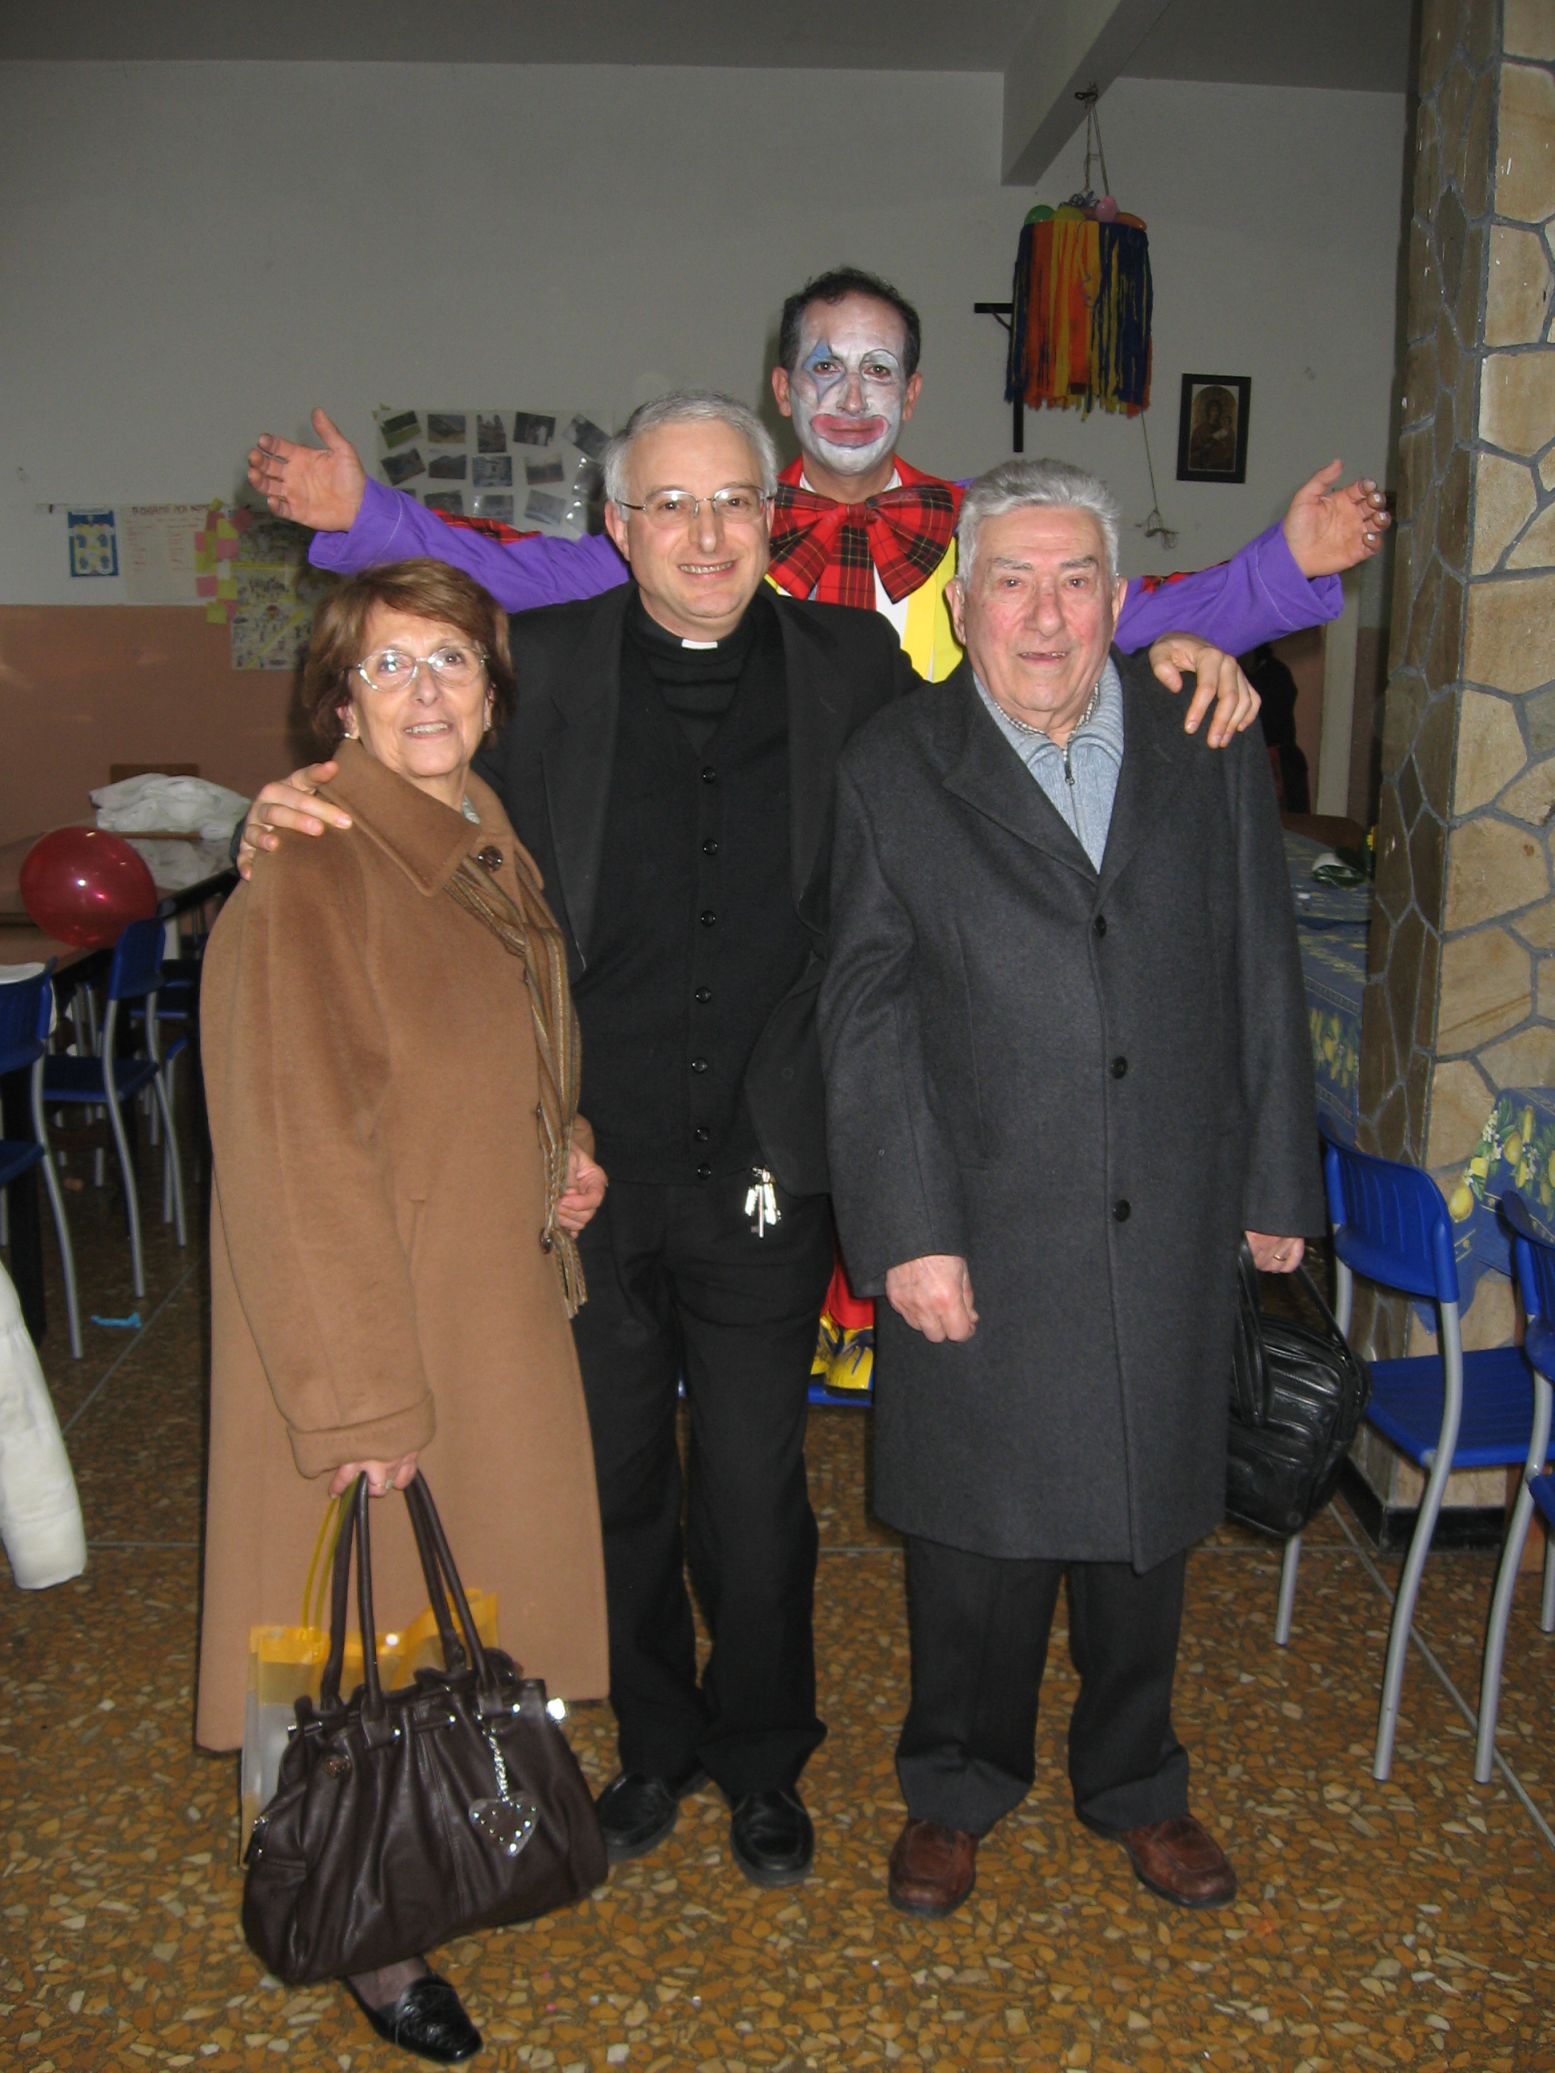 Compleanno-2010-02-07--15.11.36